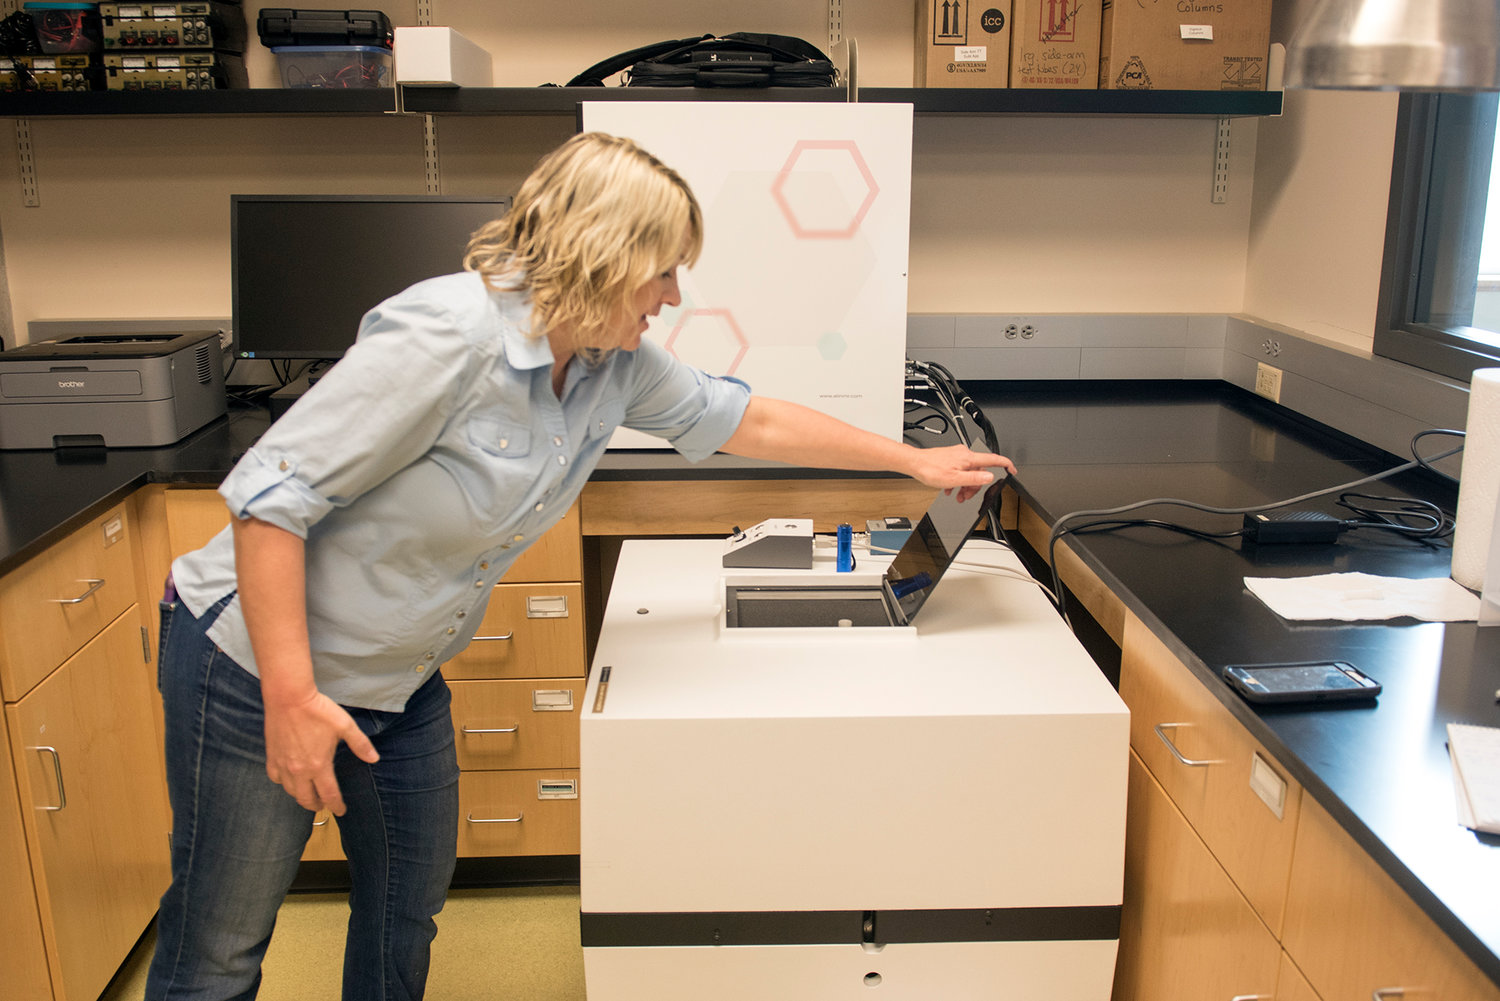 Centralia College Associate Chemistry Professor Karen Goodwin begins to demonstrate how the college’s new Nuclear Magnetic Resonance Spectrometer (NMR) works Thursday afternoon in Centralia.